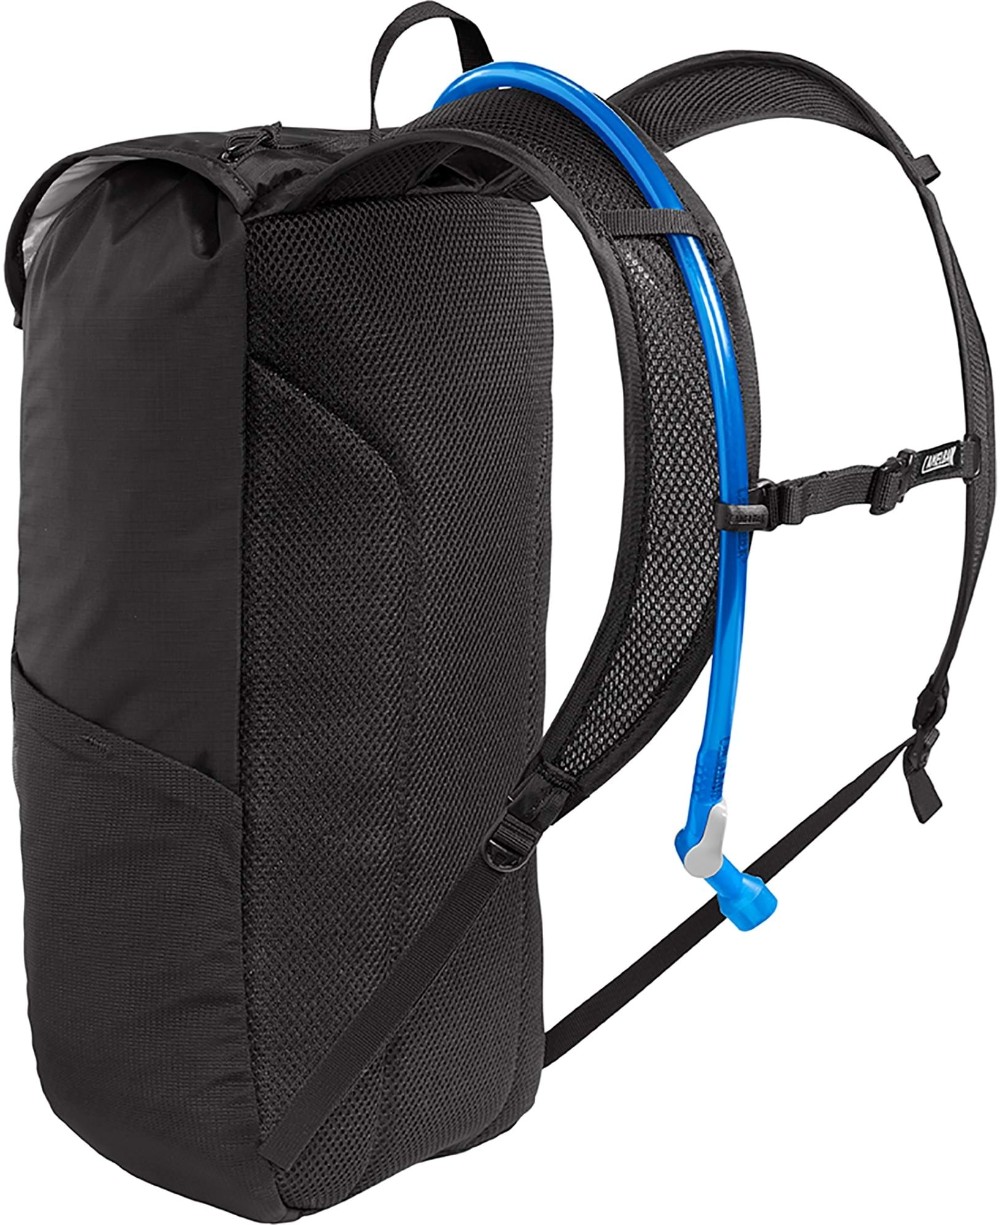 Arete Hydration Pack 18 With 1.5L Reservoir image 1